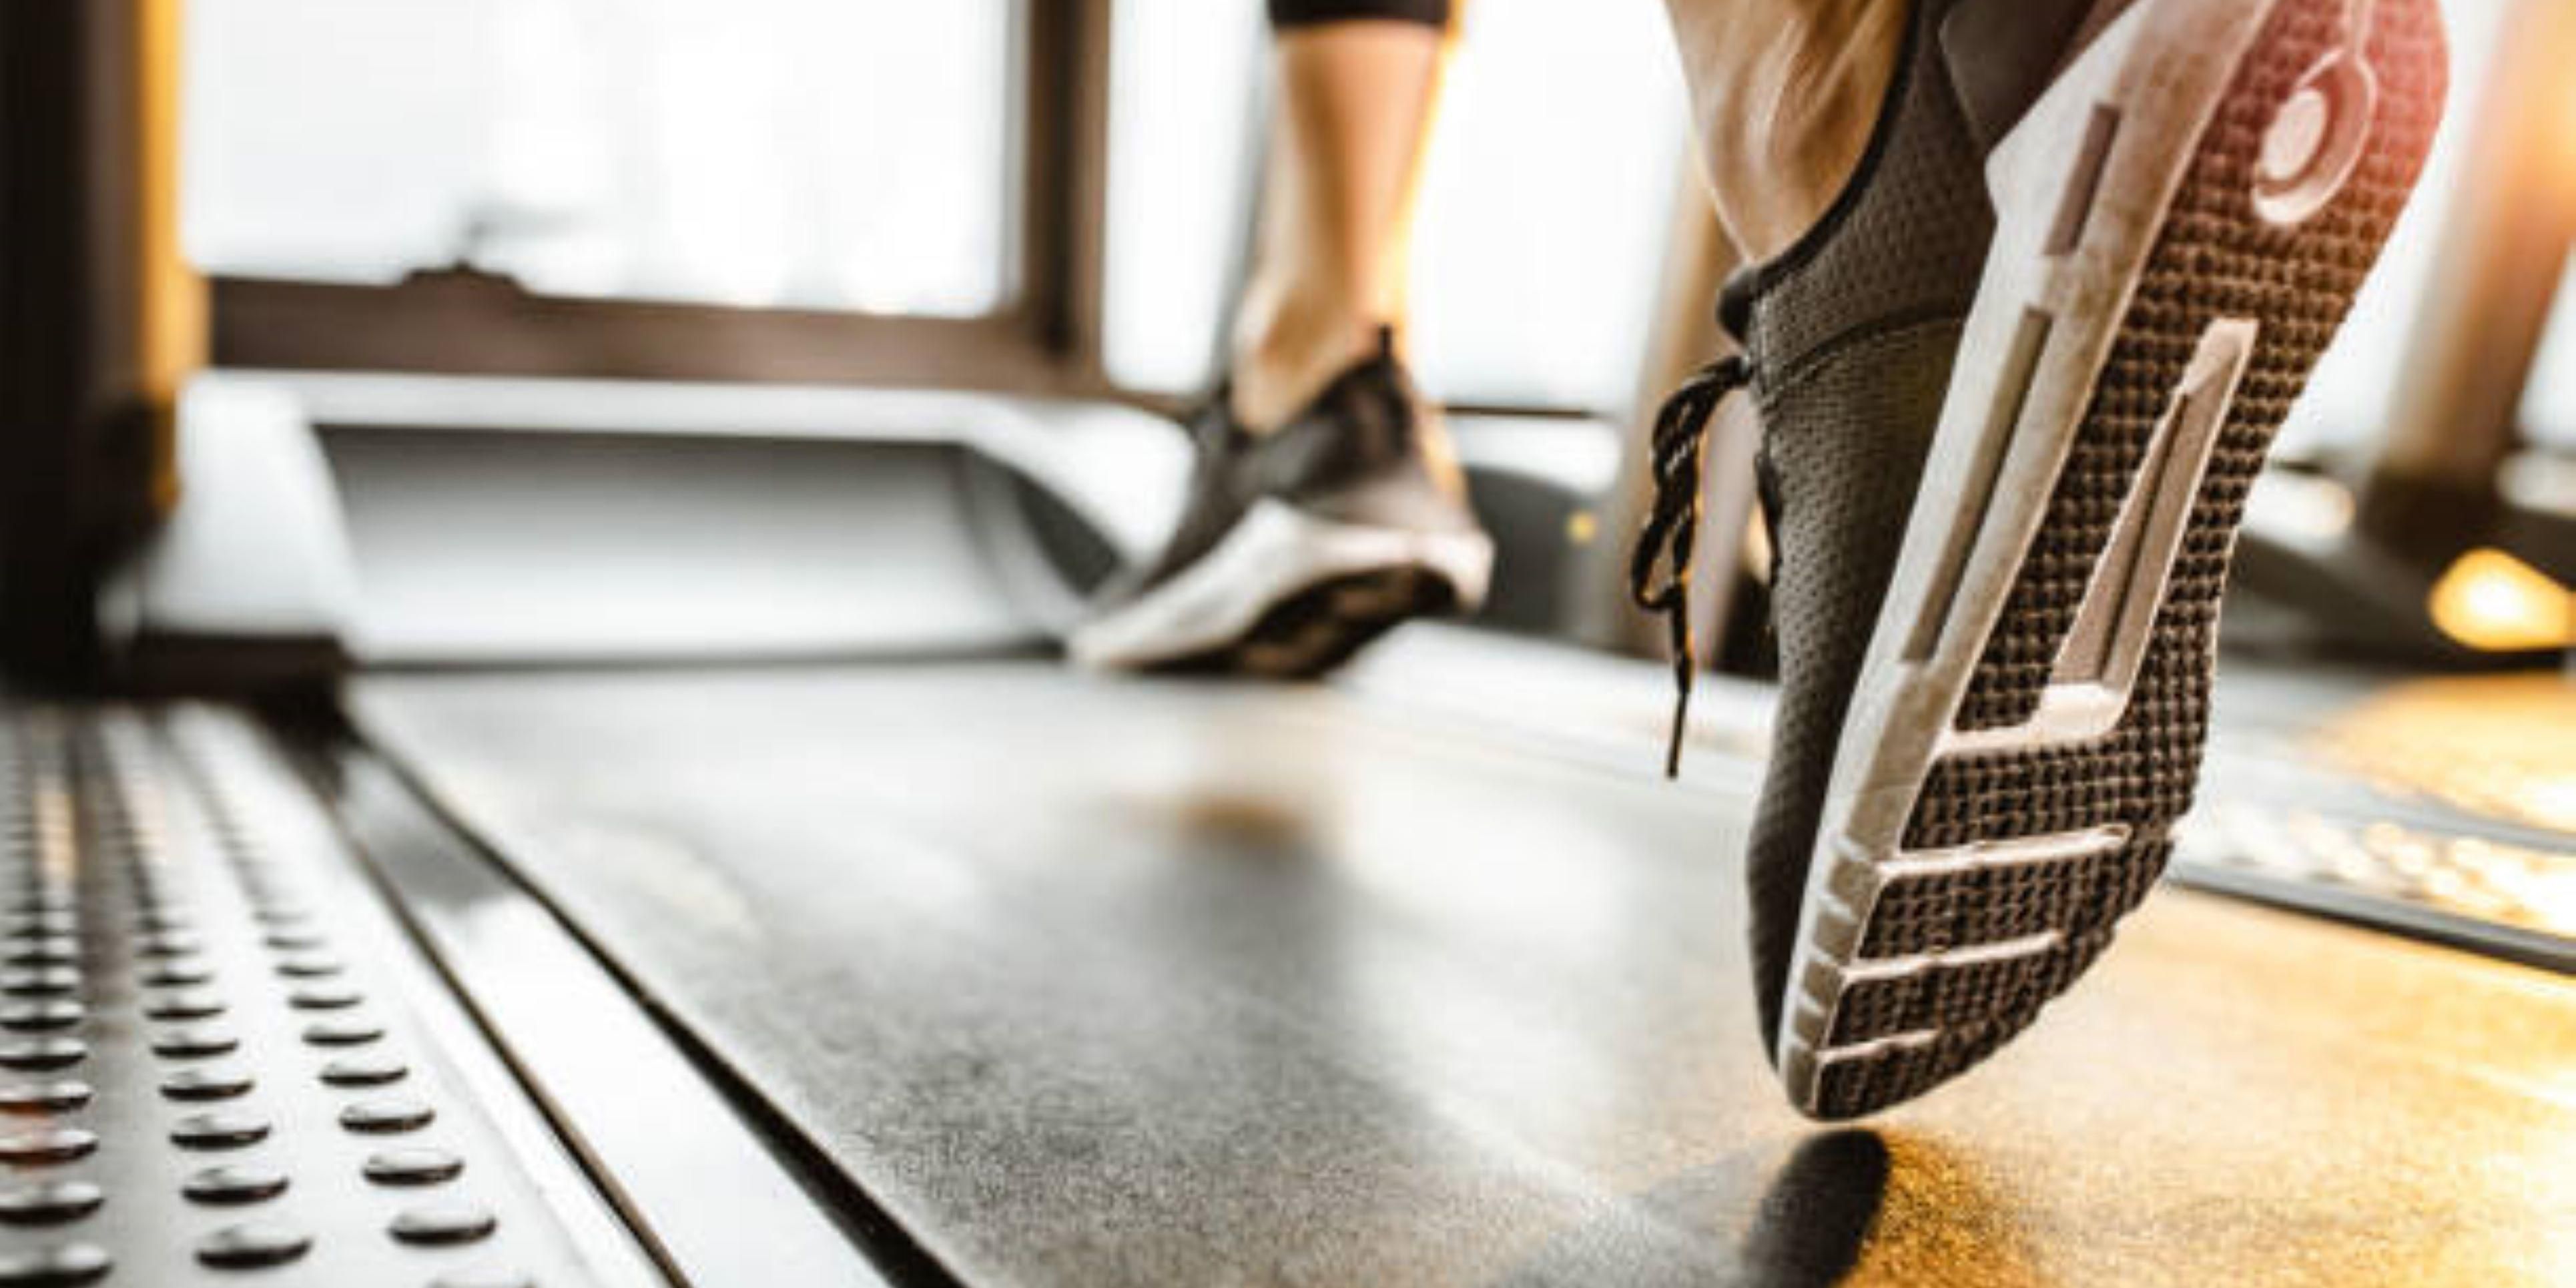 Get your sweat on in our complimentary, fully equipped fitness center with a treadmill, elliptical machines, free weights, yoga balls, and yoga mats, open 24 hours.